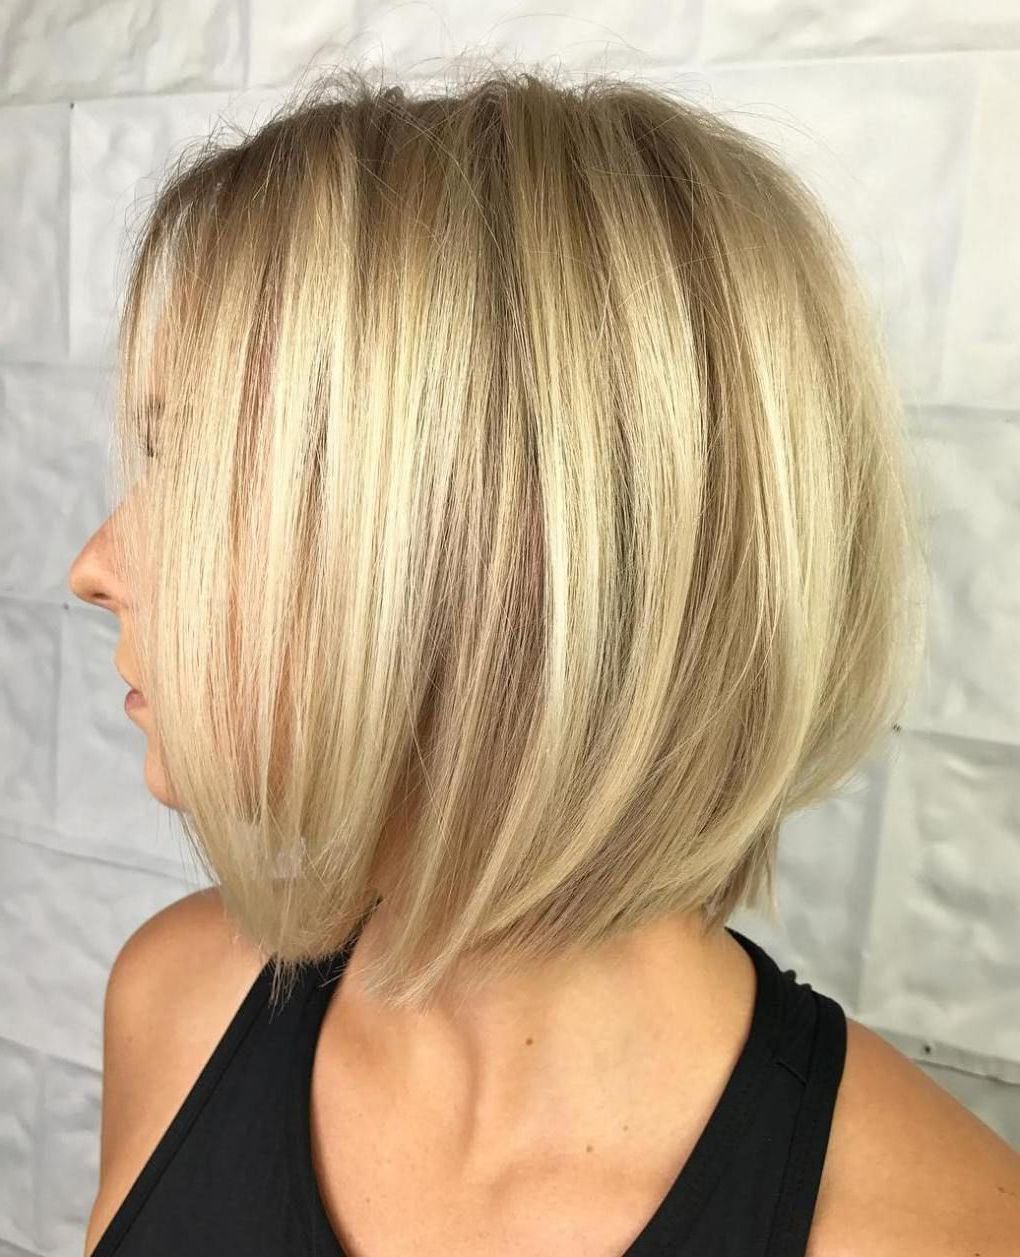 100 Mind Blowing Short Hairstyles For Fine Hair | Hair Styles Pertaining To White Bob Undercut Hairstyles With Root Fade (View 10 of 20)